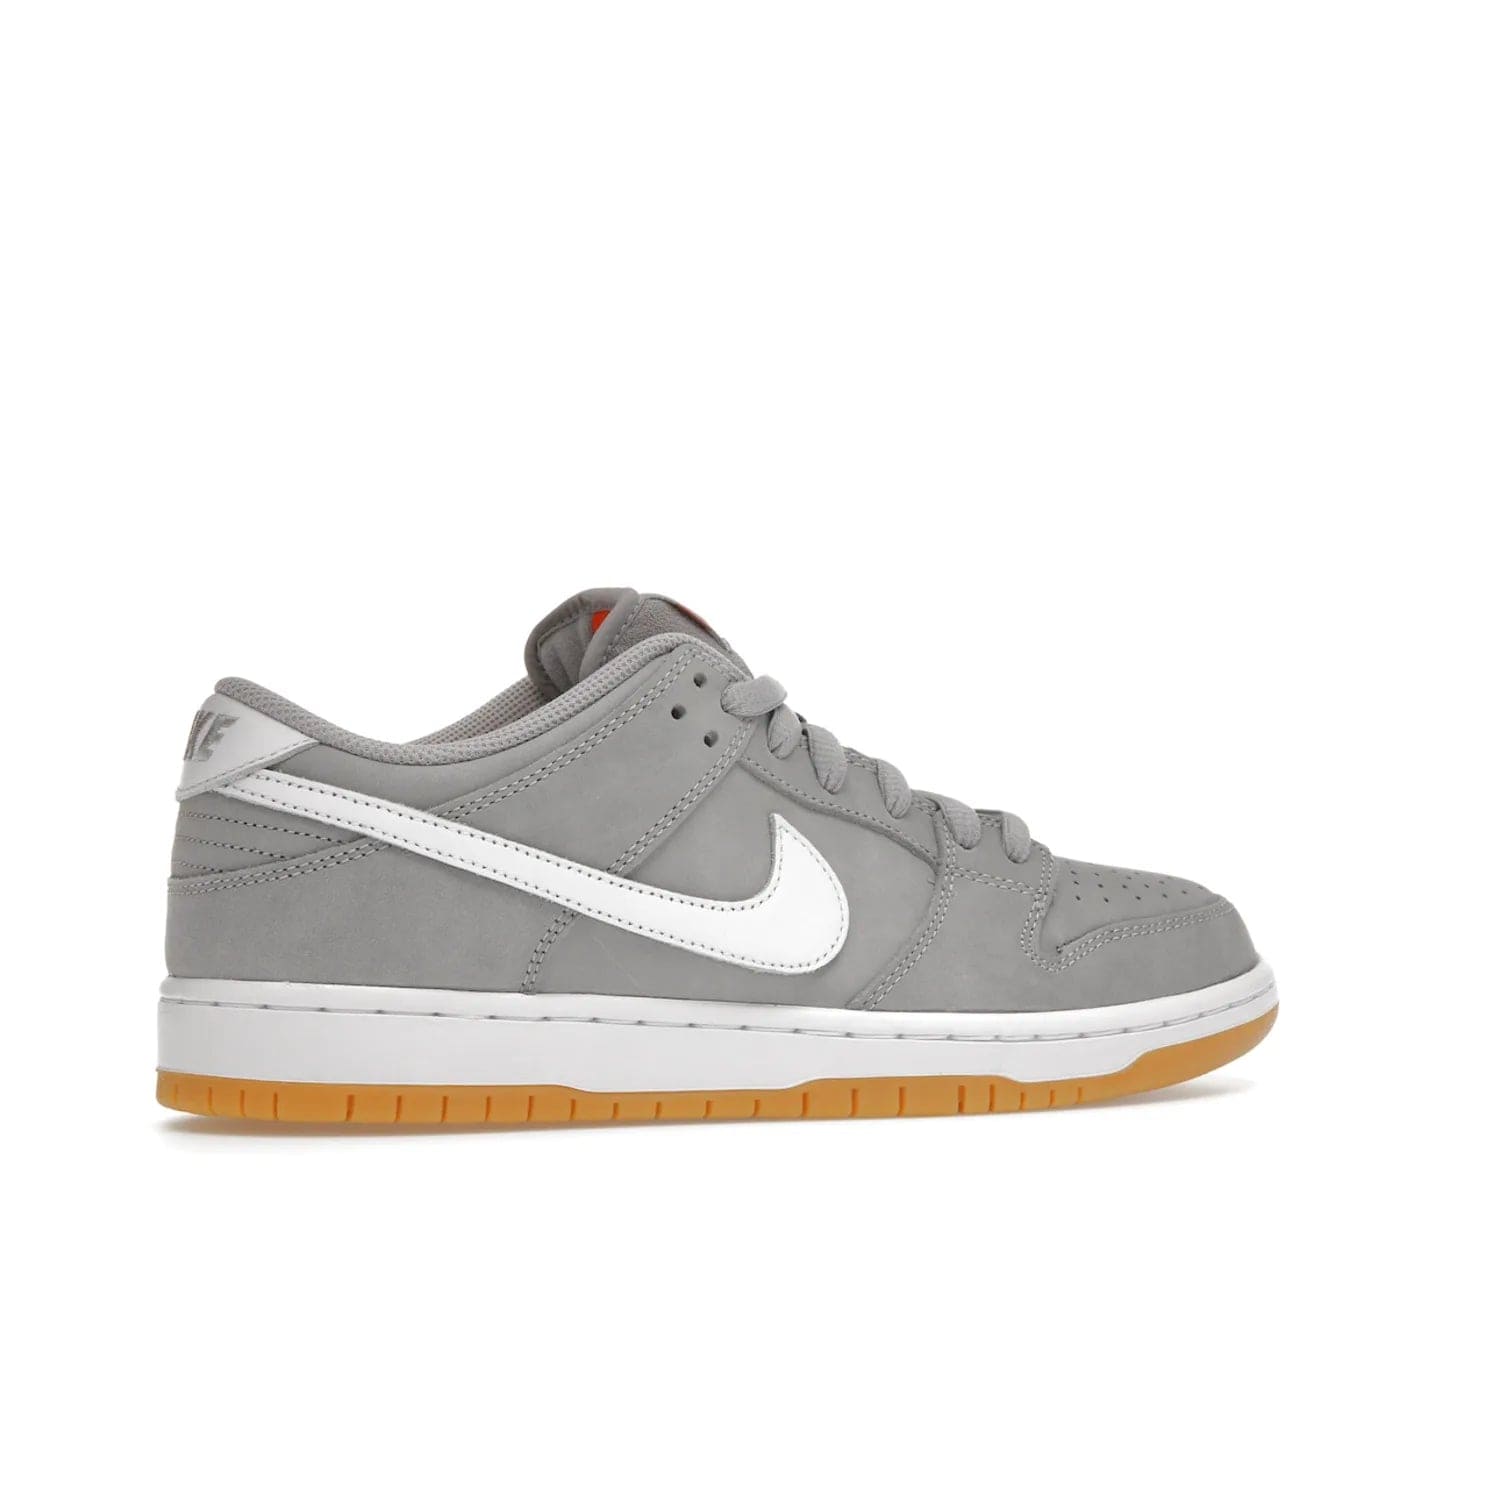 Nike SB Dunk Low Pro ISO Orange Label Wolf Grey Gum - Image 35 - Only at www.BallersClubKickz.com - Introducing Nike's SB Dunk Low Pro ISO Orange Label Wolf Grey Gum - a stylish shoe with a premium Wolf Grey upper, white leather Nike Swoosh, and an eye-catching gum outsole. With special Nike branding and packaging, this shoe adds a unique fashion statement. Out Feb. 24, 2023.